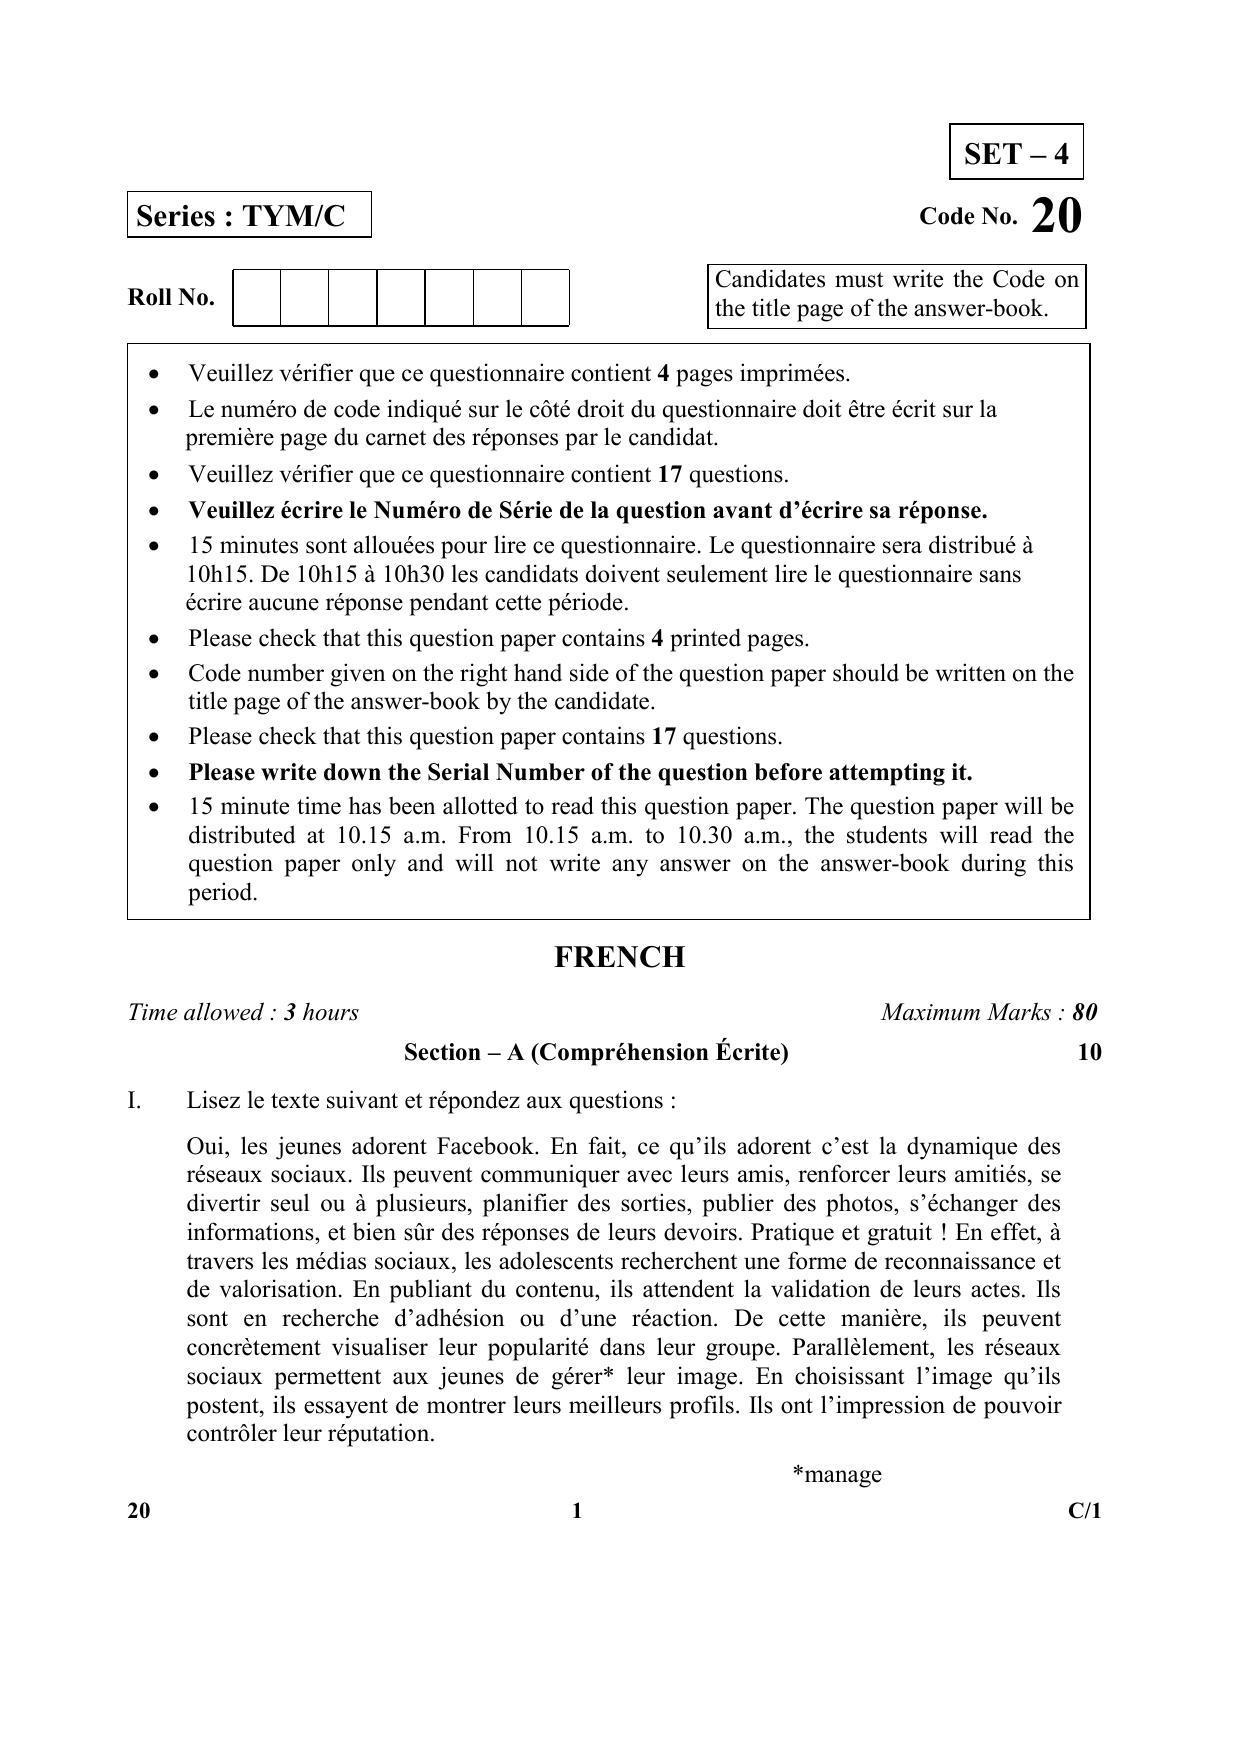 CBSE Class 10 20 (French) 2018 Compartment Question Paper - Page 1